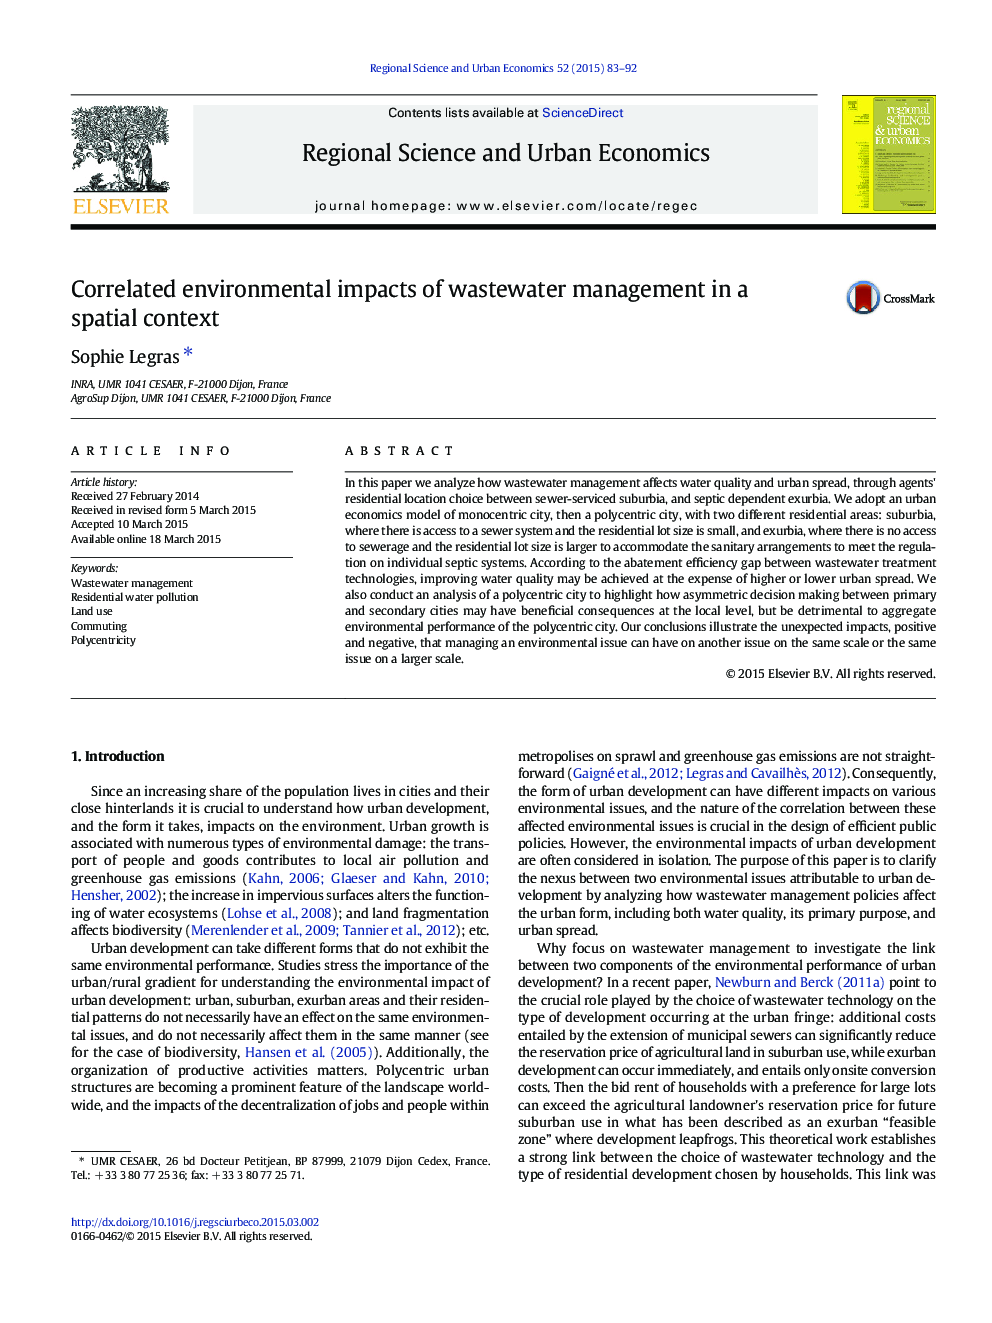 Correlated environmental impacts of wastewater management in a spatial context